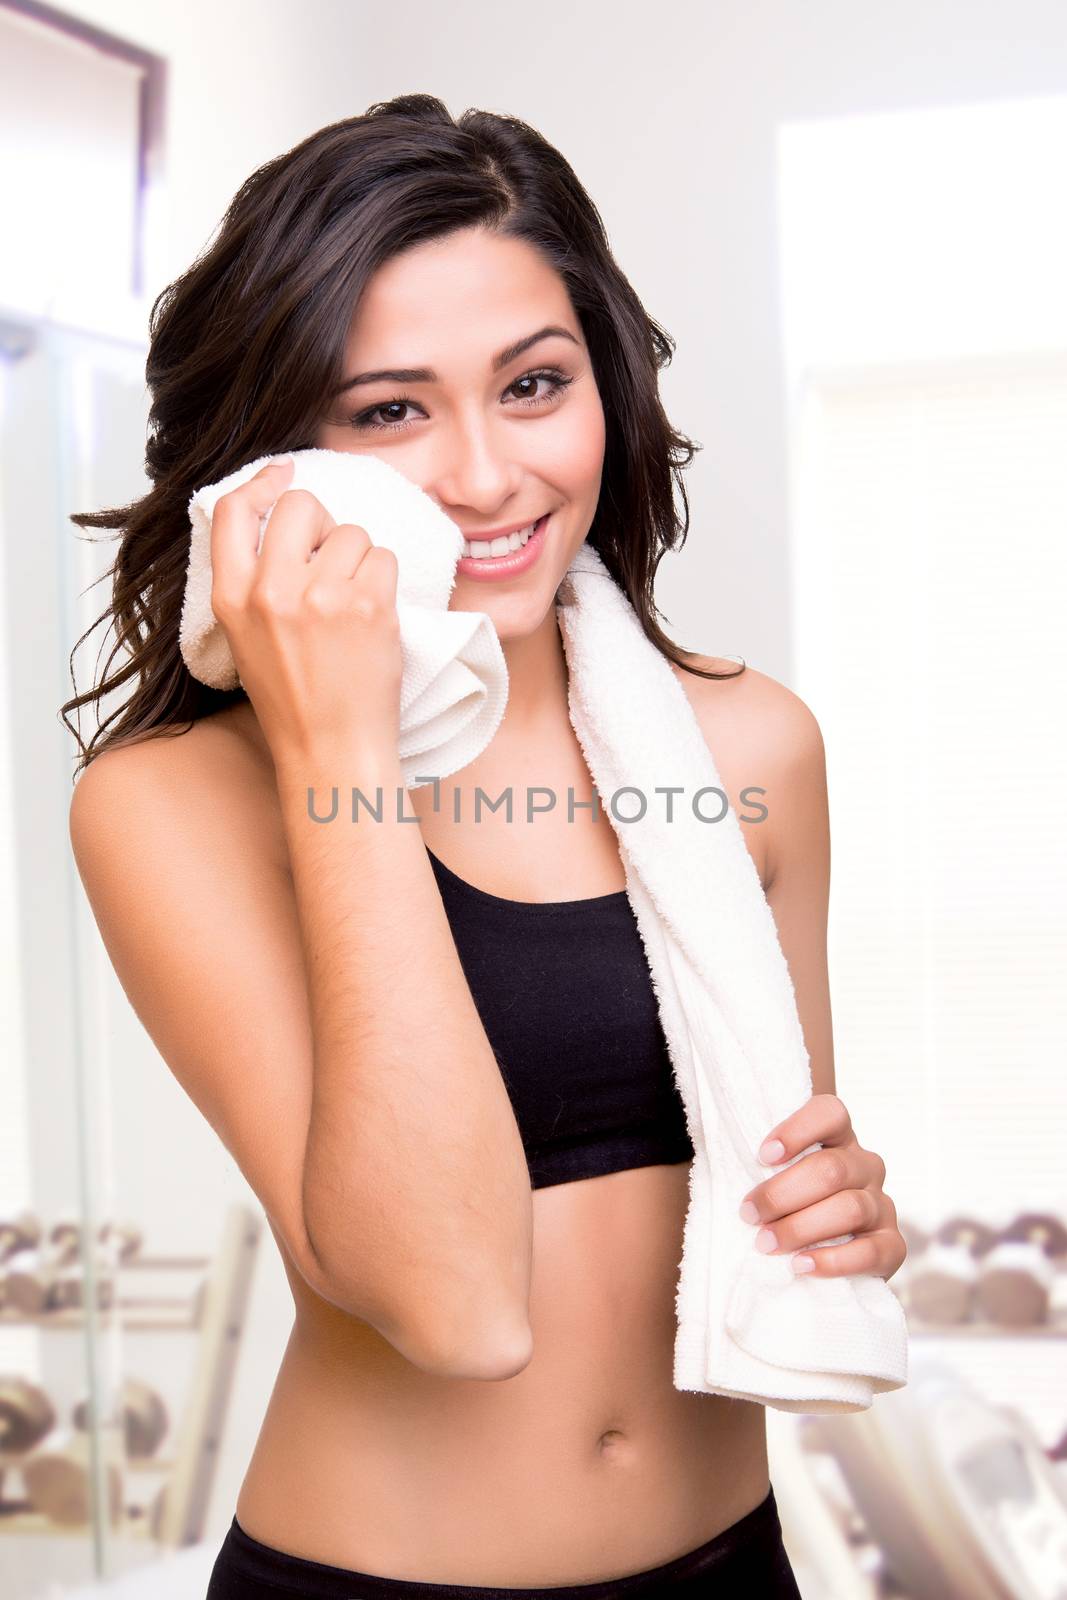 Fitness woman wiping sweat with a towel